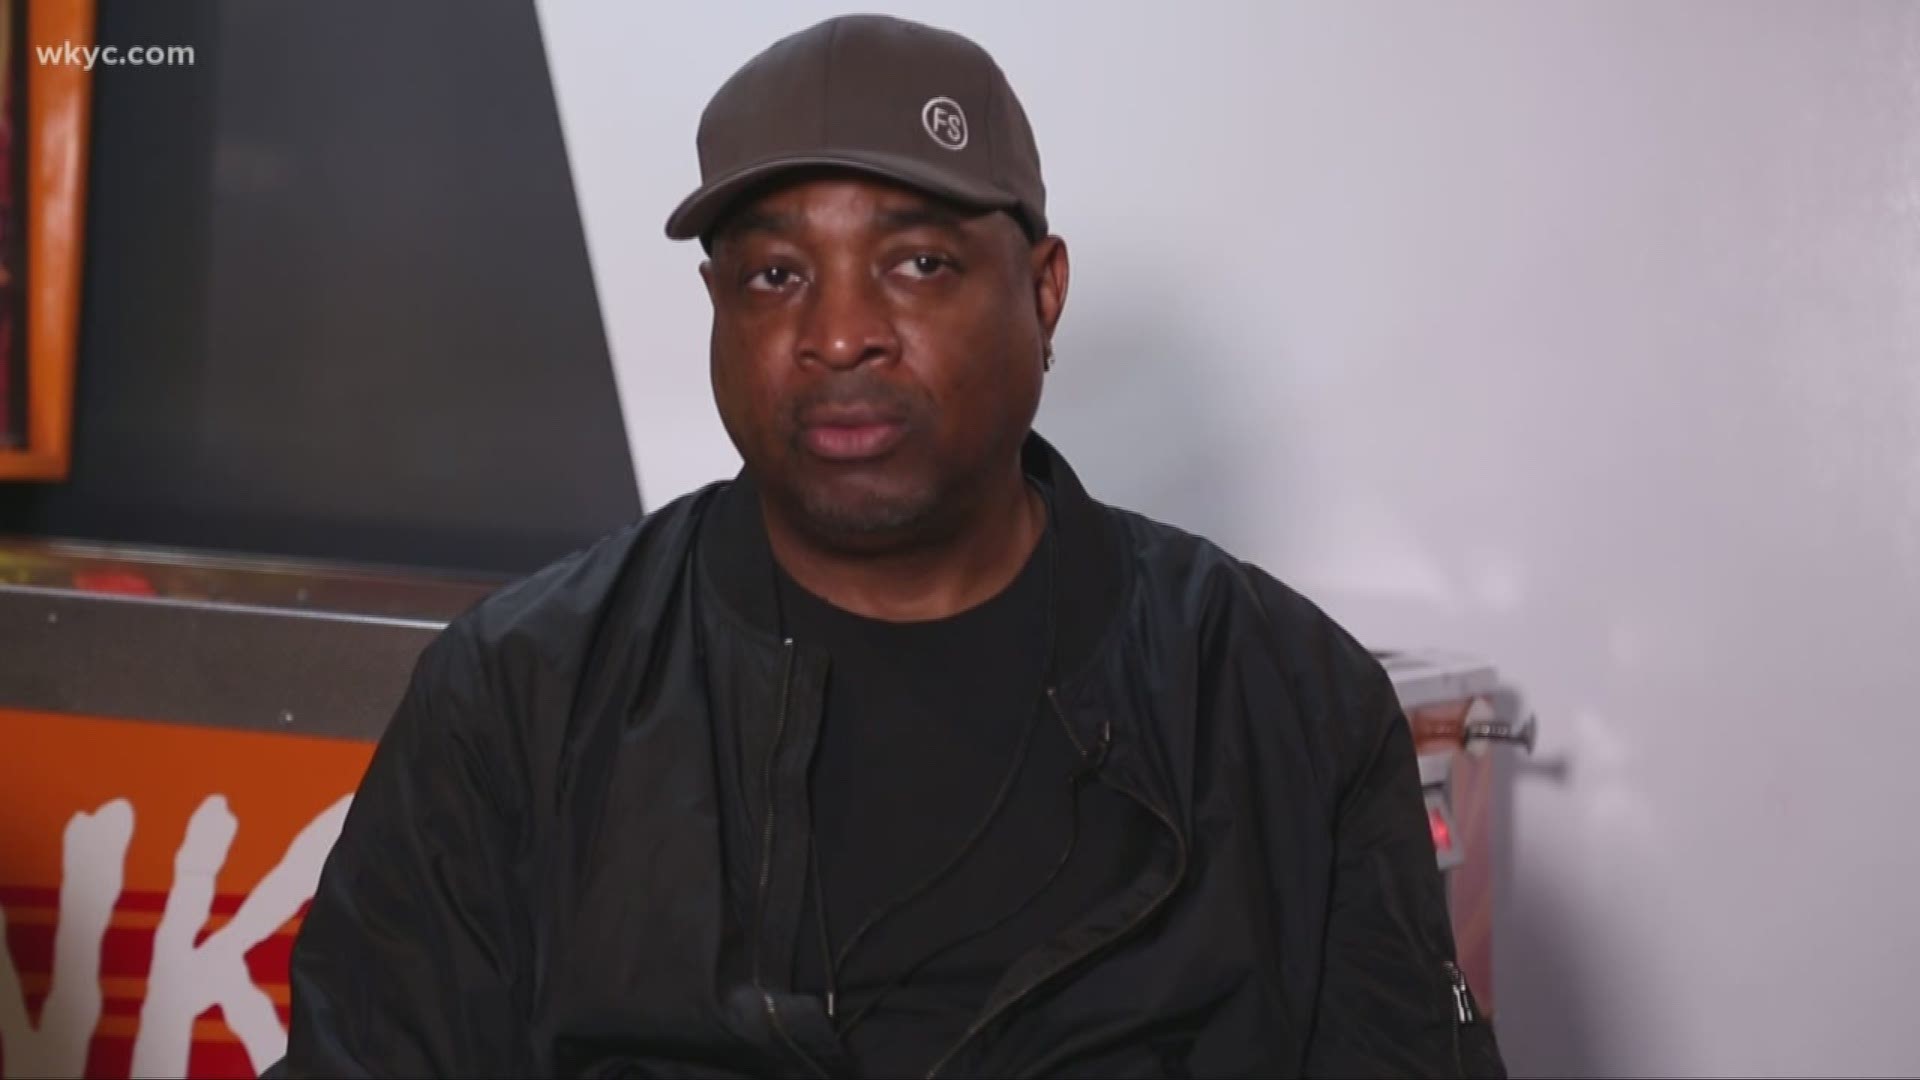 Public Enemy's Chuck D returns to Rock and Roll Hall of Fame